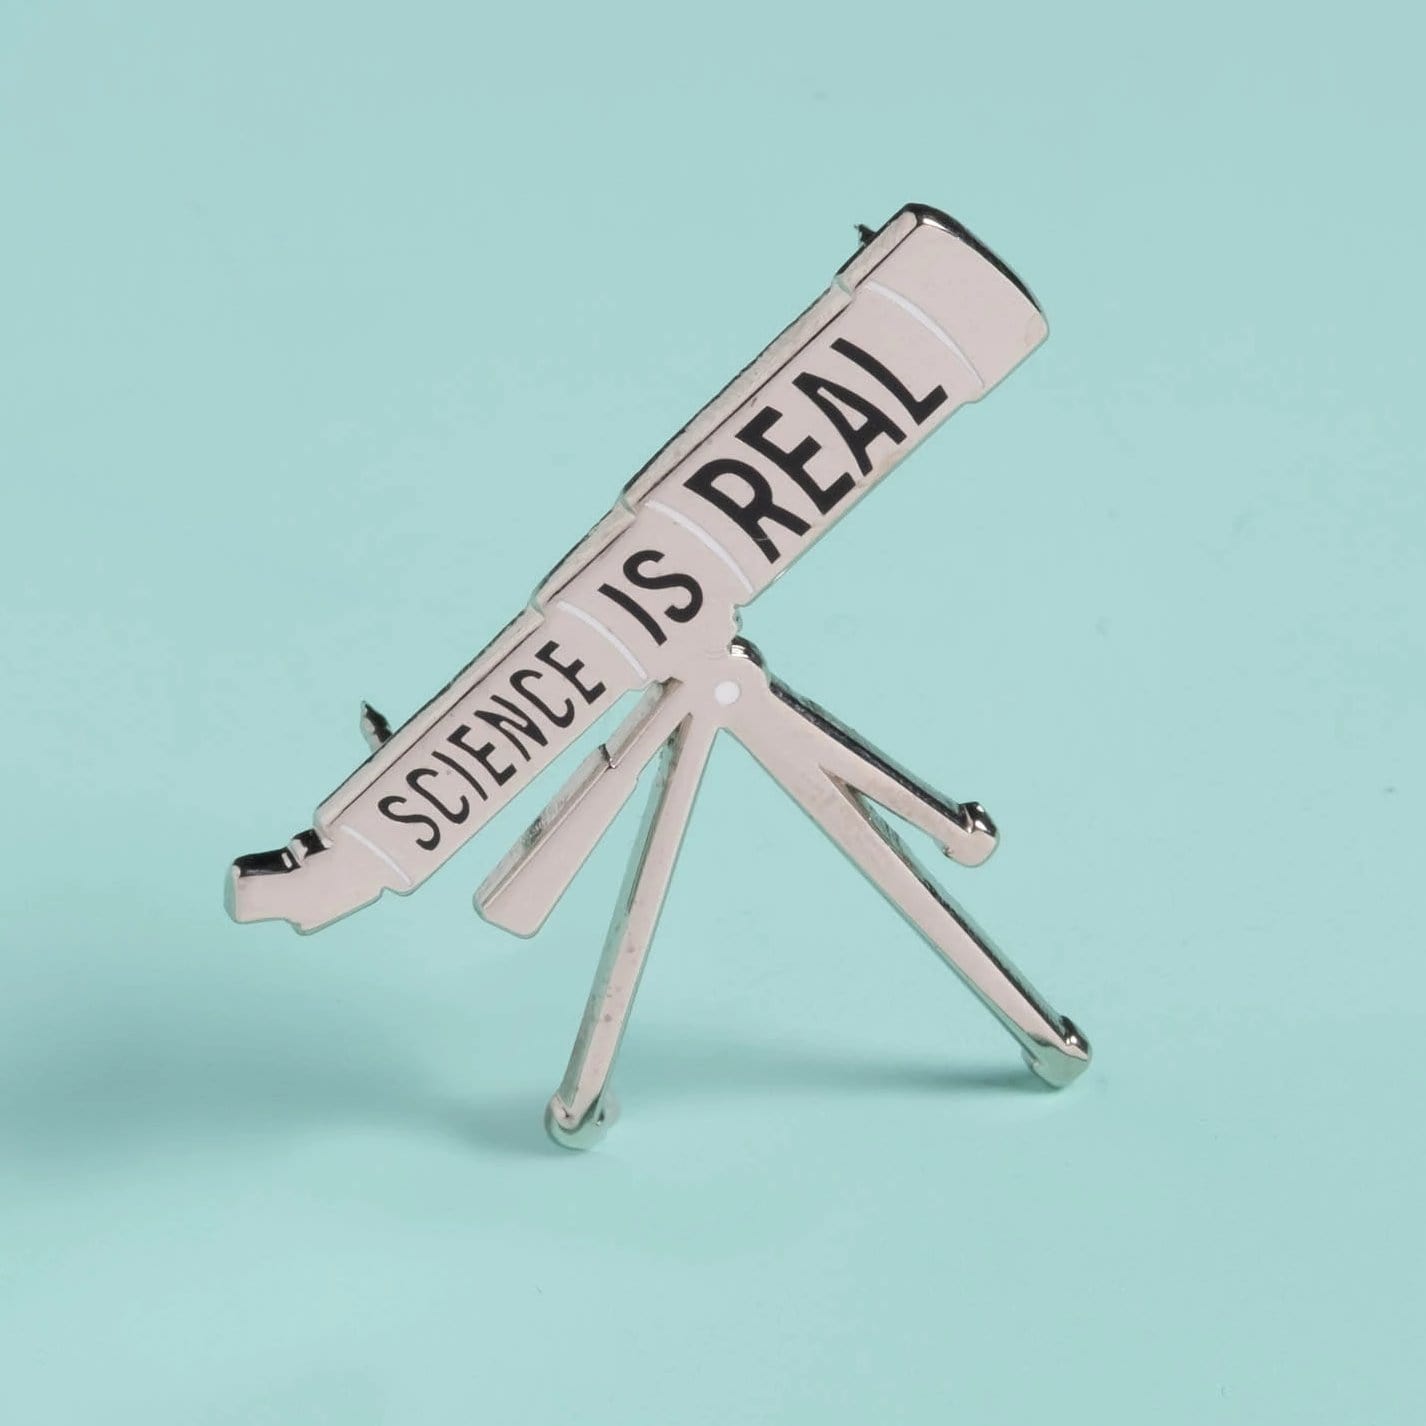 Science is Real - Telescope Pin